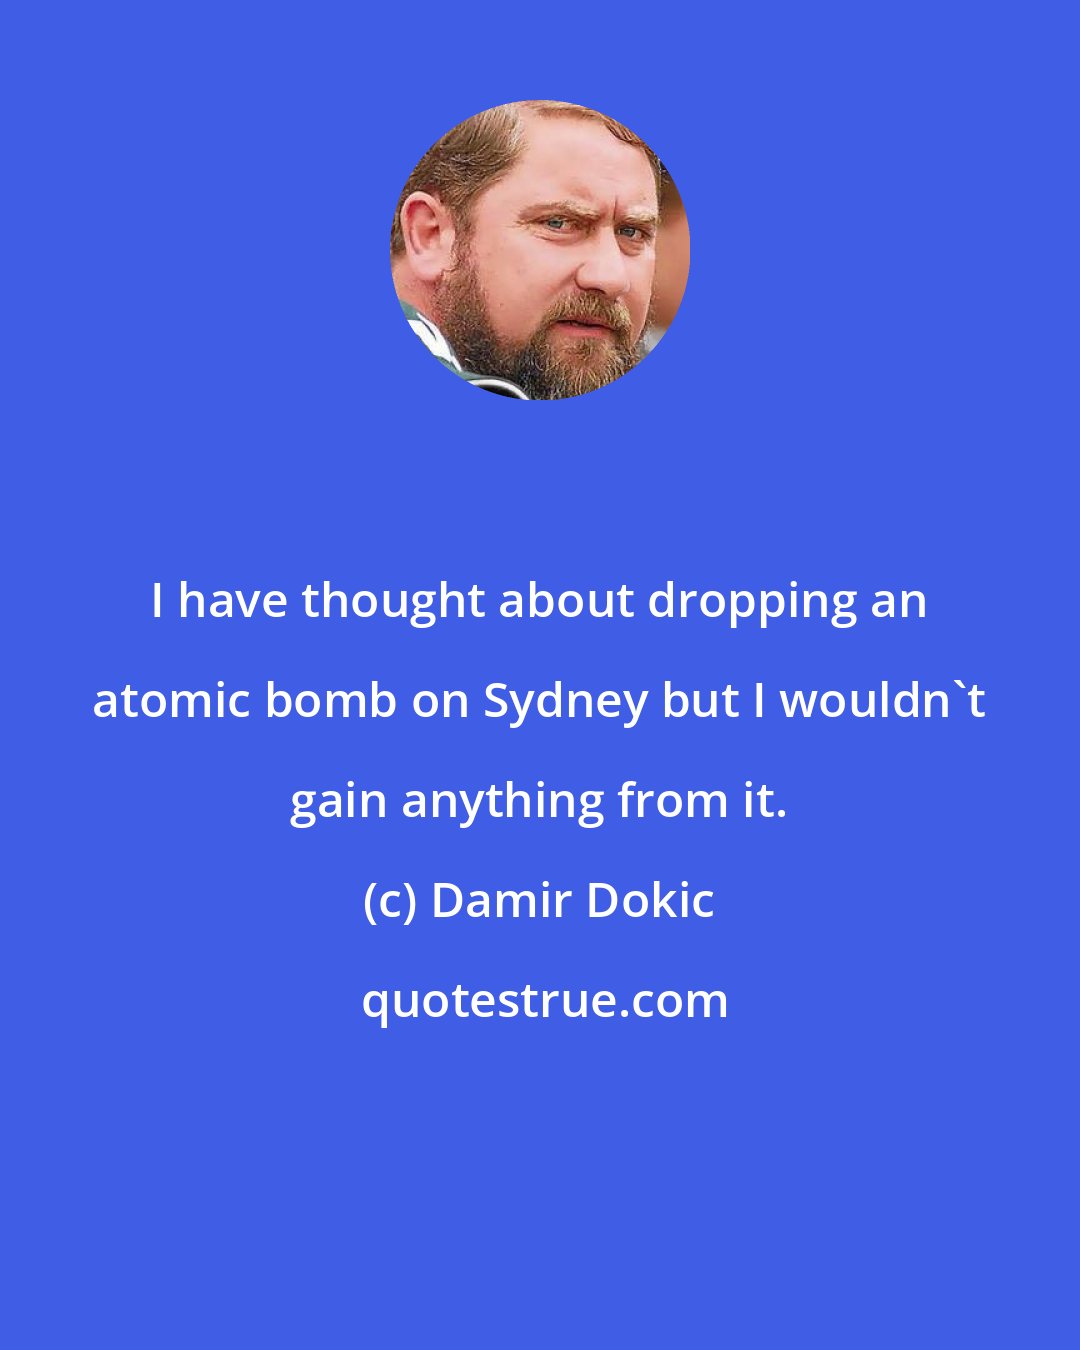 Damir Dokic: I have thought about dropping an atomic bomb on Sydney but I wouldn't gain anything from it.